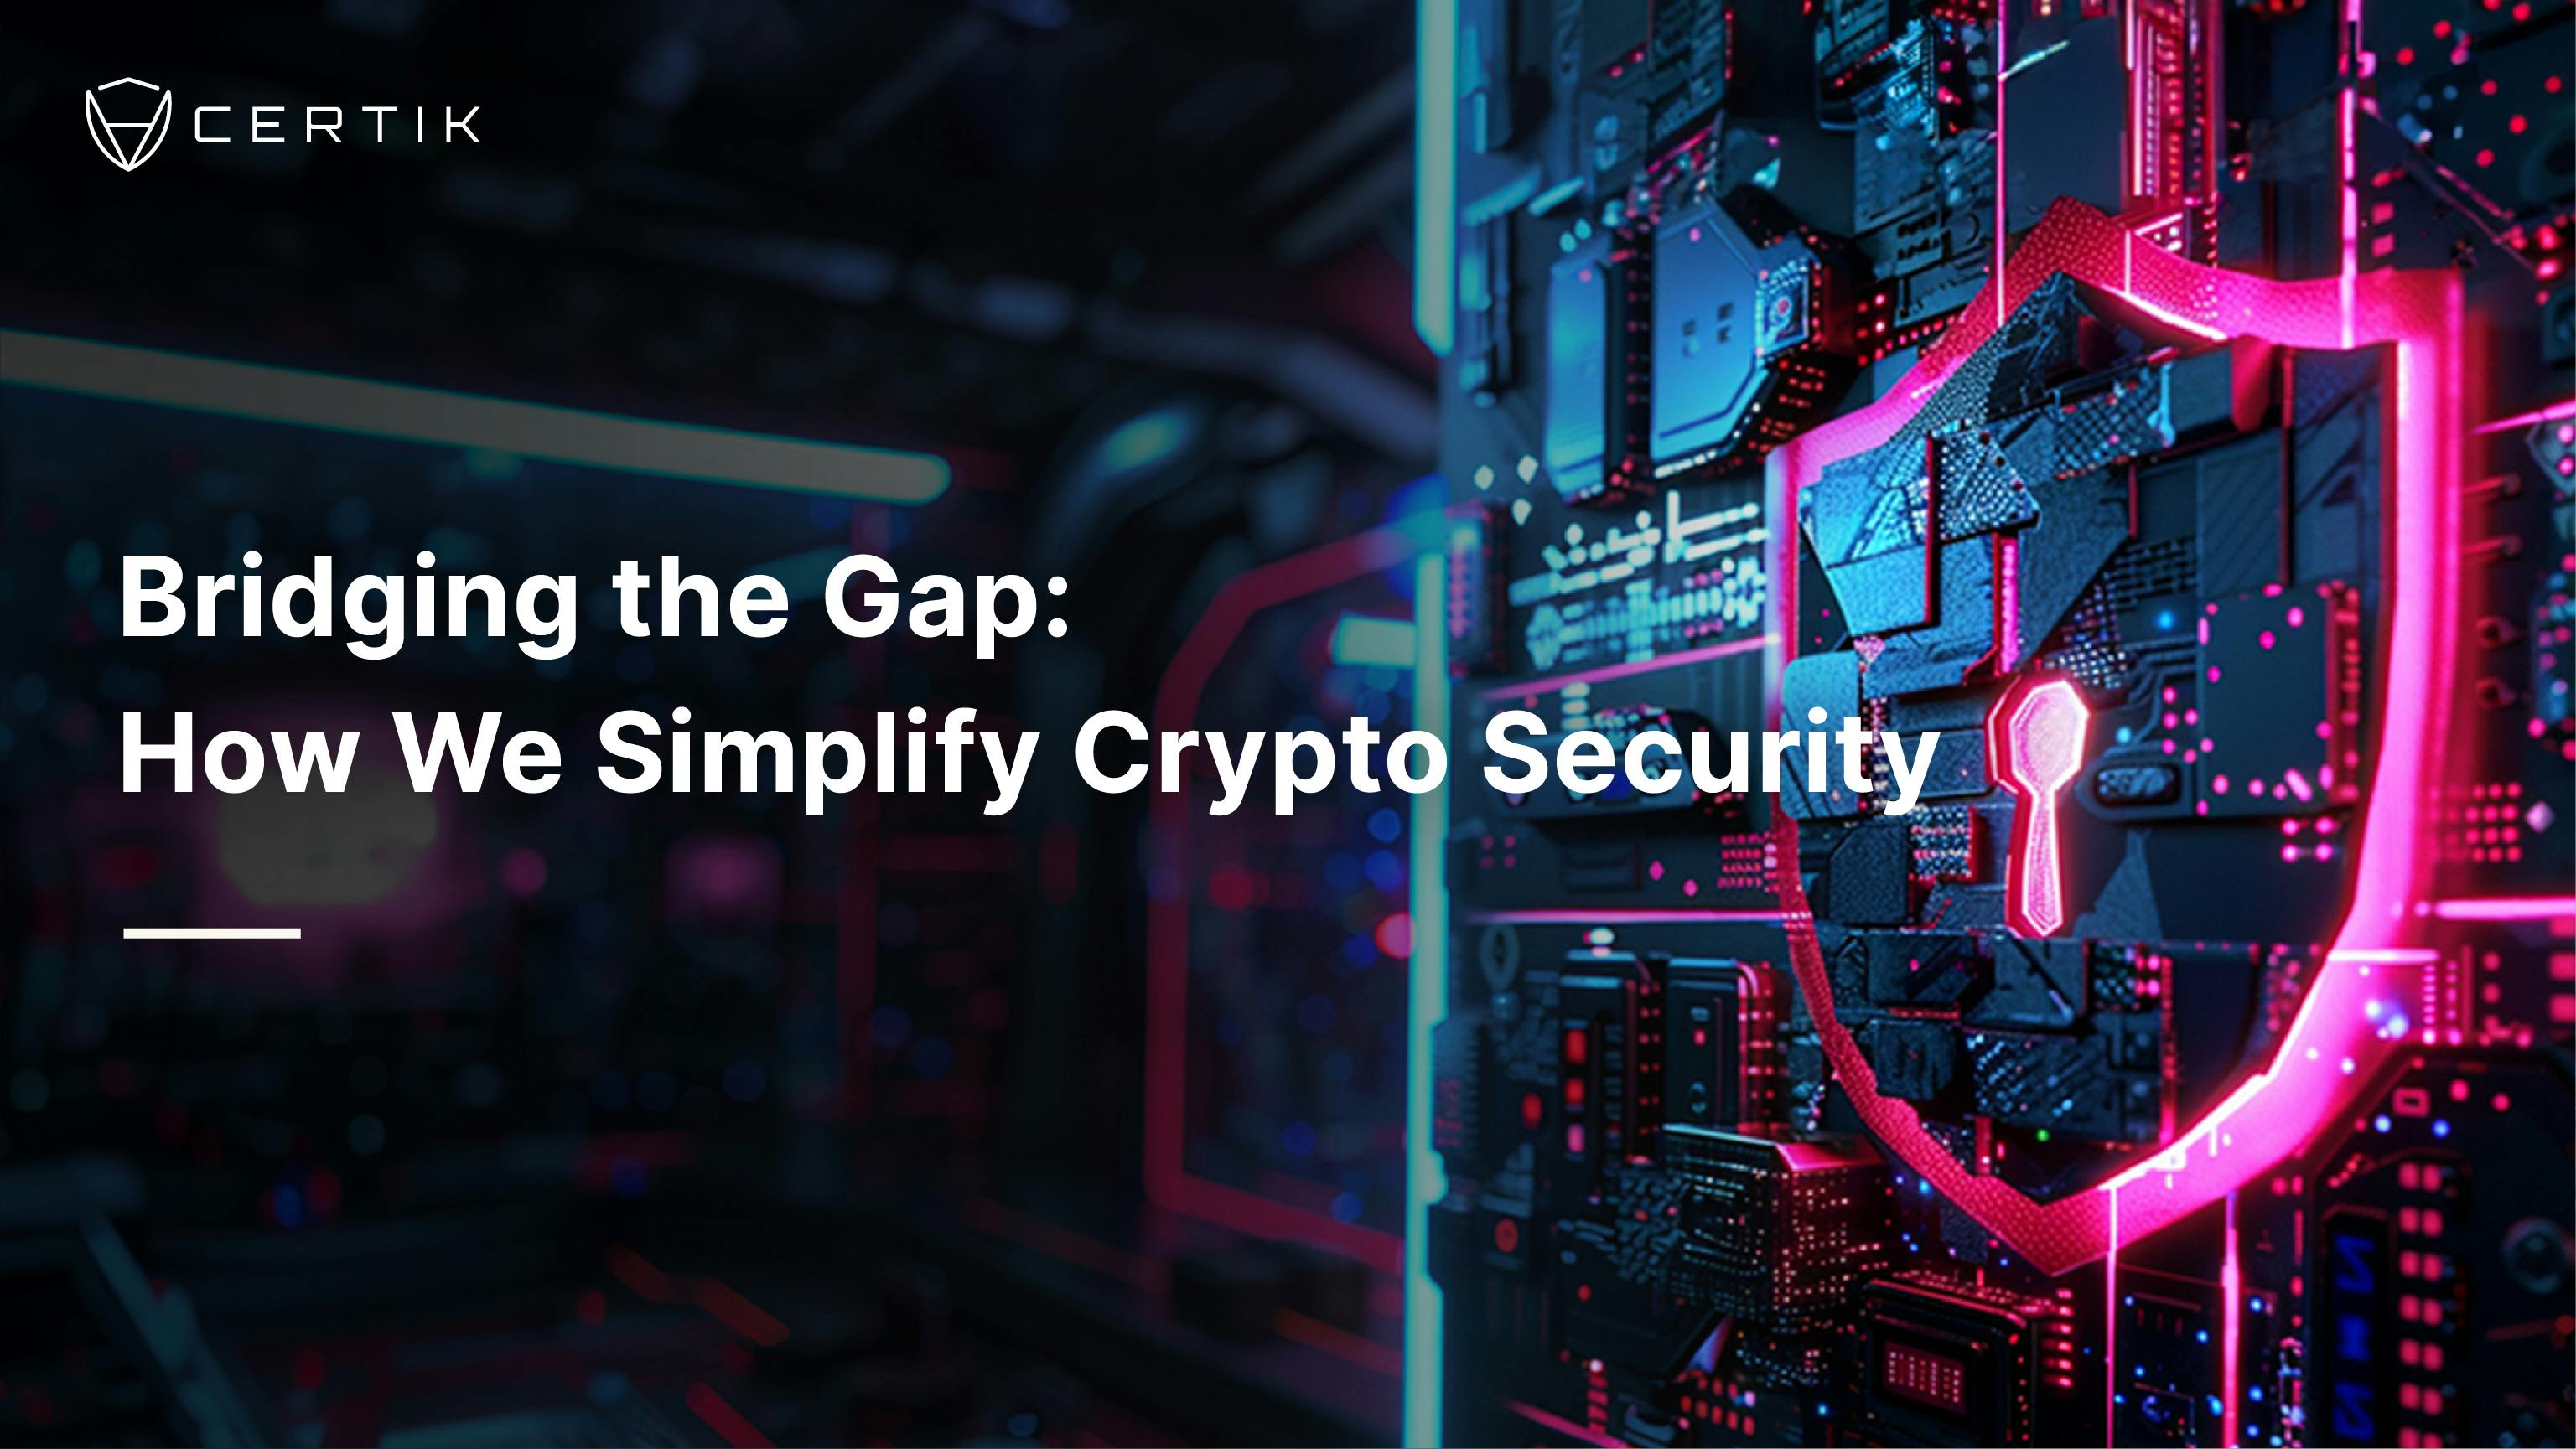 Bridging the Gap: How We Simplify Crypto Security